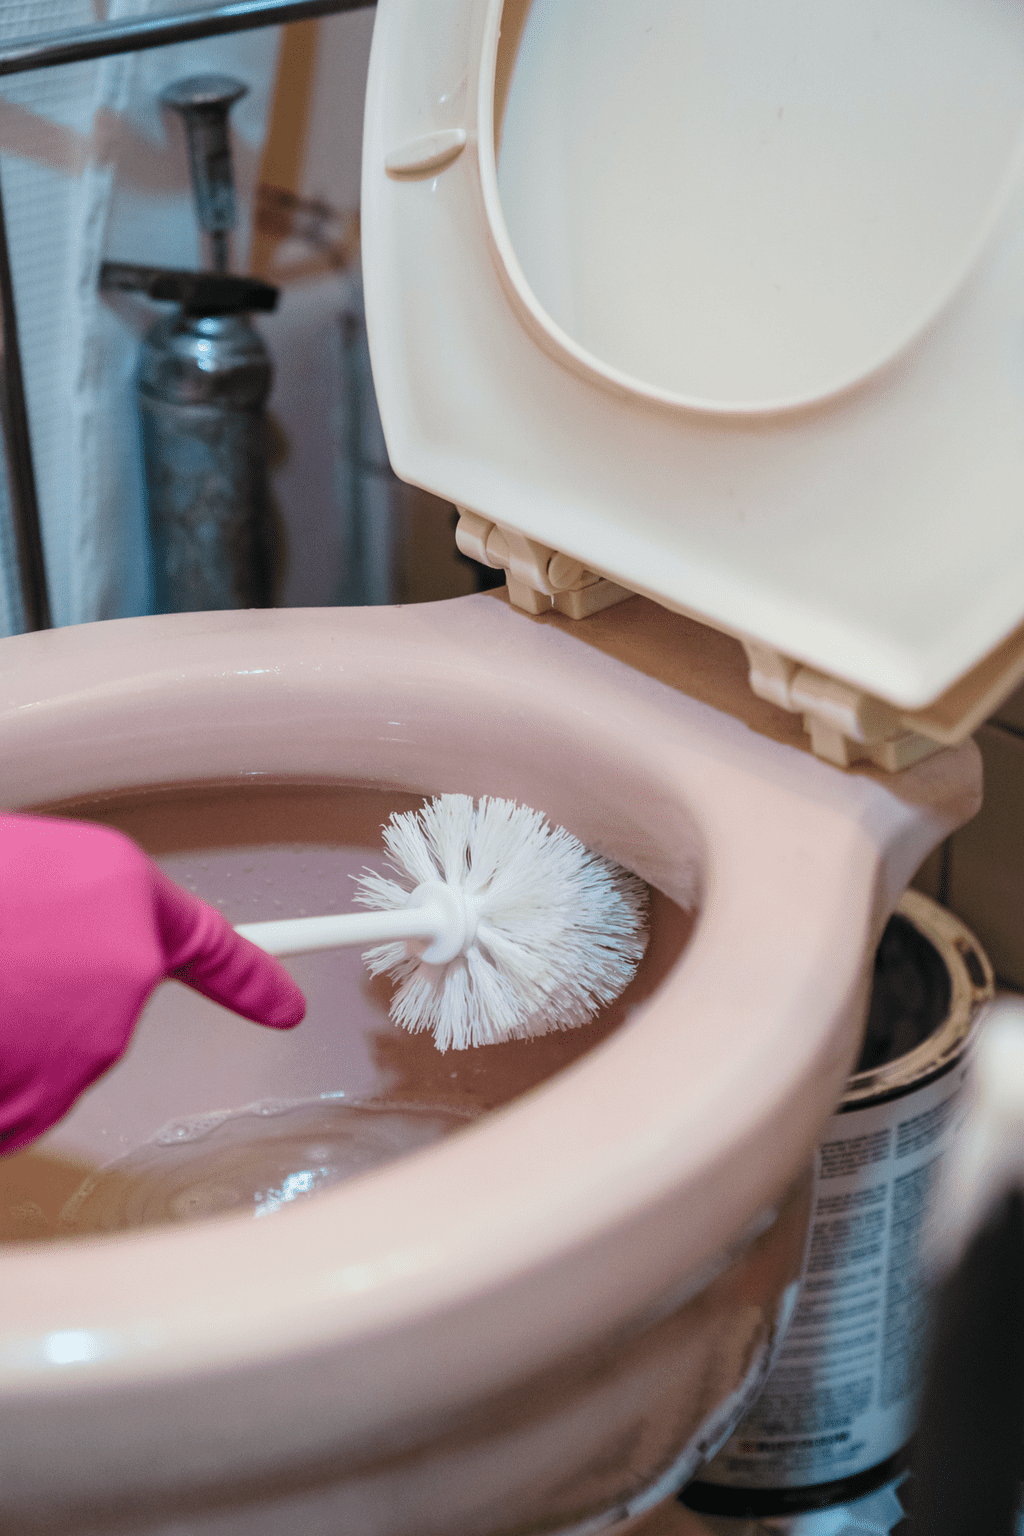 Scrub your toilet, using toilet bowl cleaners. Don't forget to clean the whole toilet, including the toilet seat